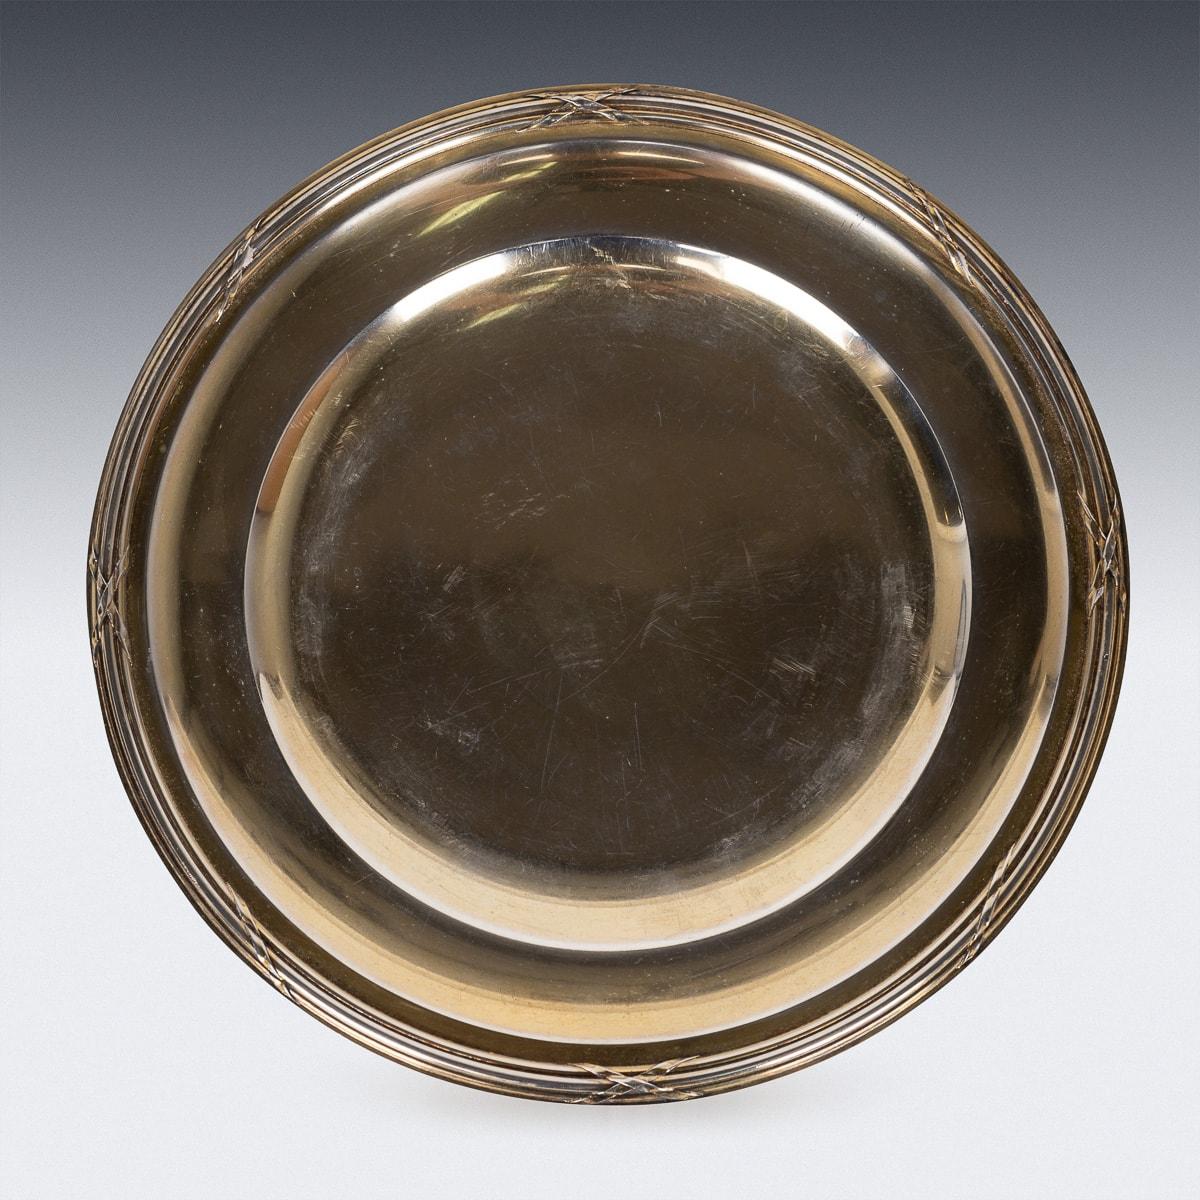 Other Antique 20th Century French Gilt Solid Silver Dishes By Gustave Keller, Paris For Sale